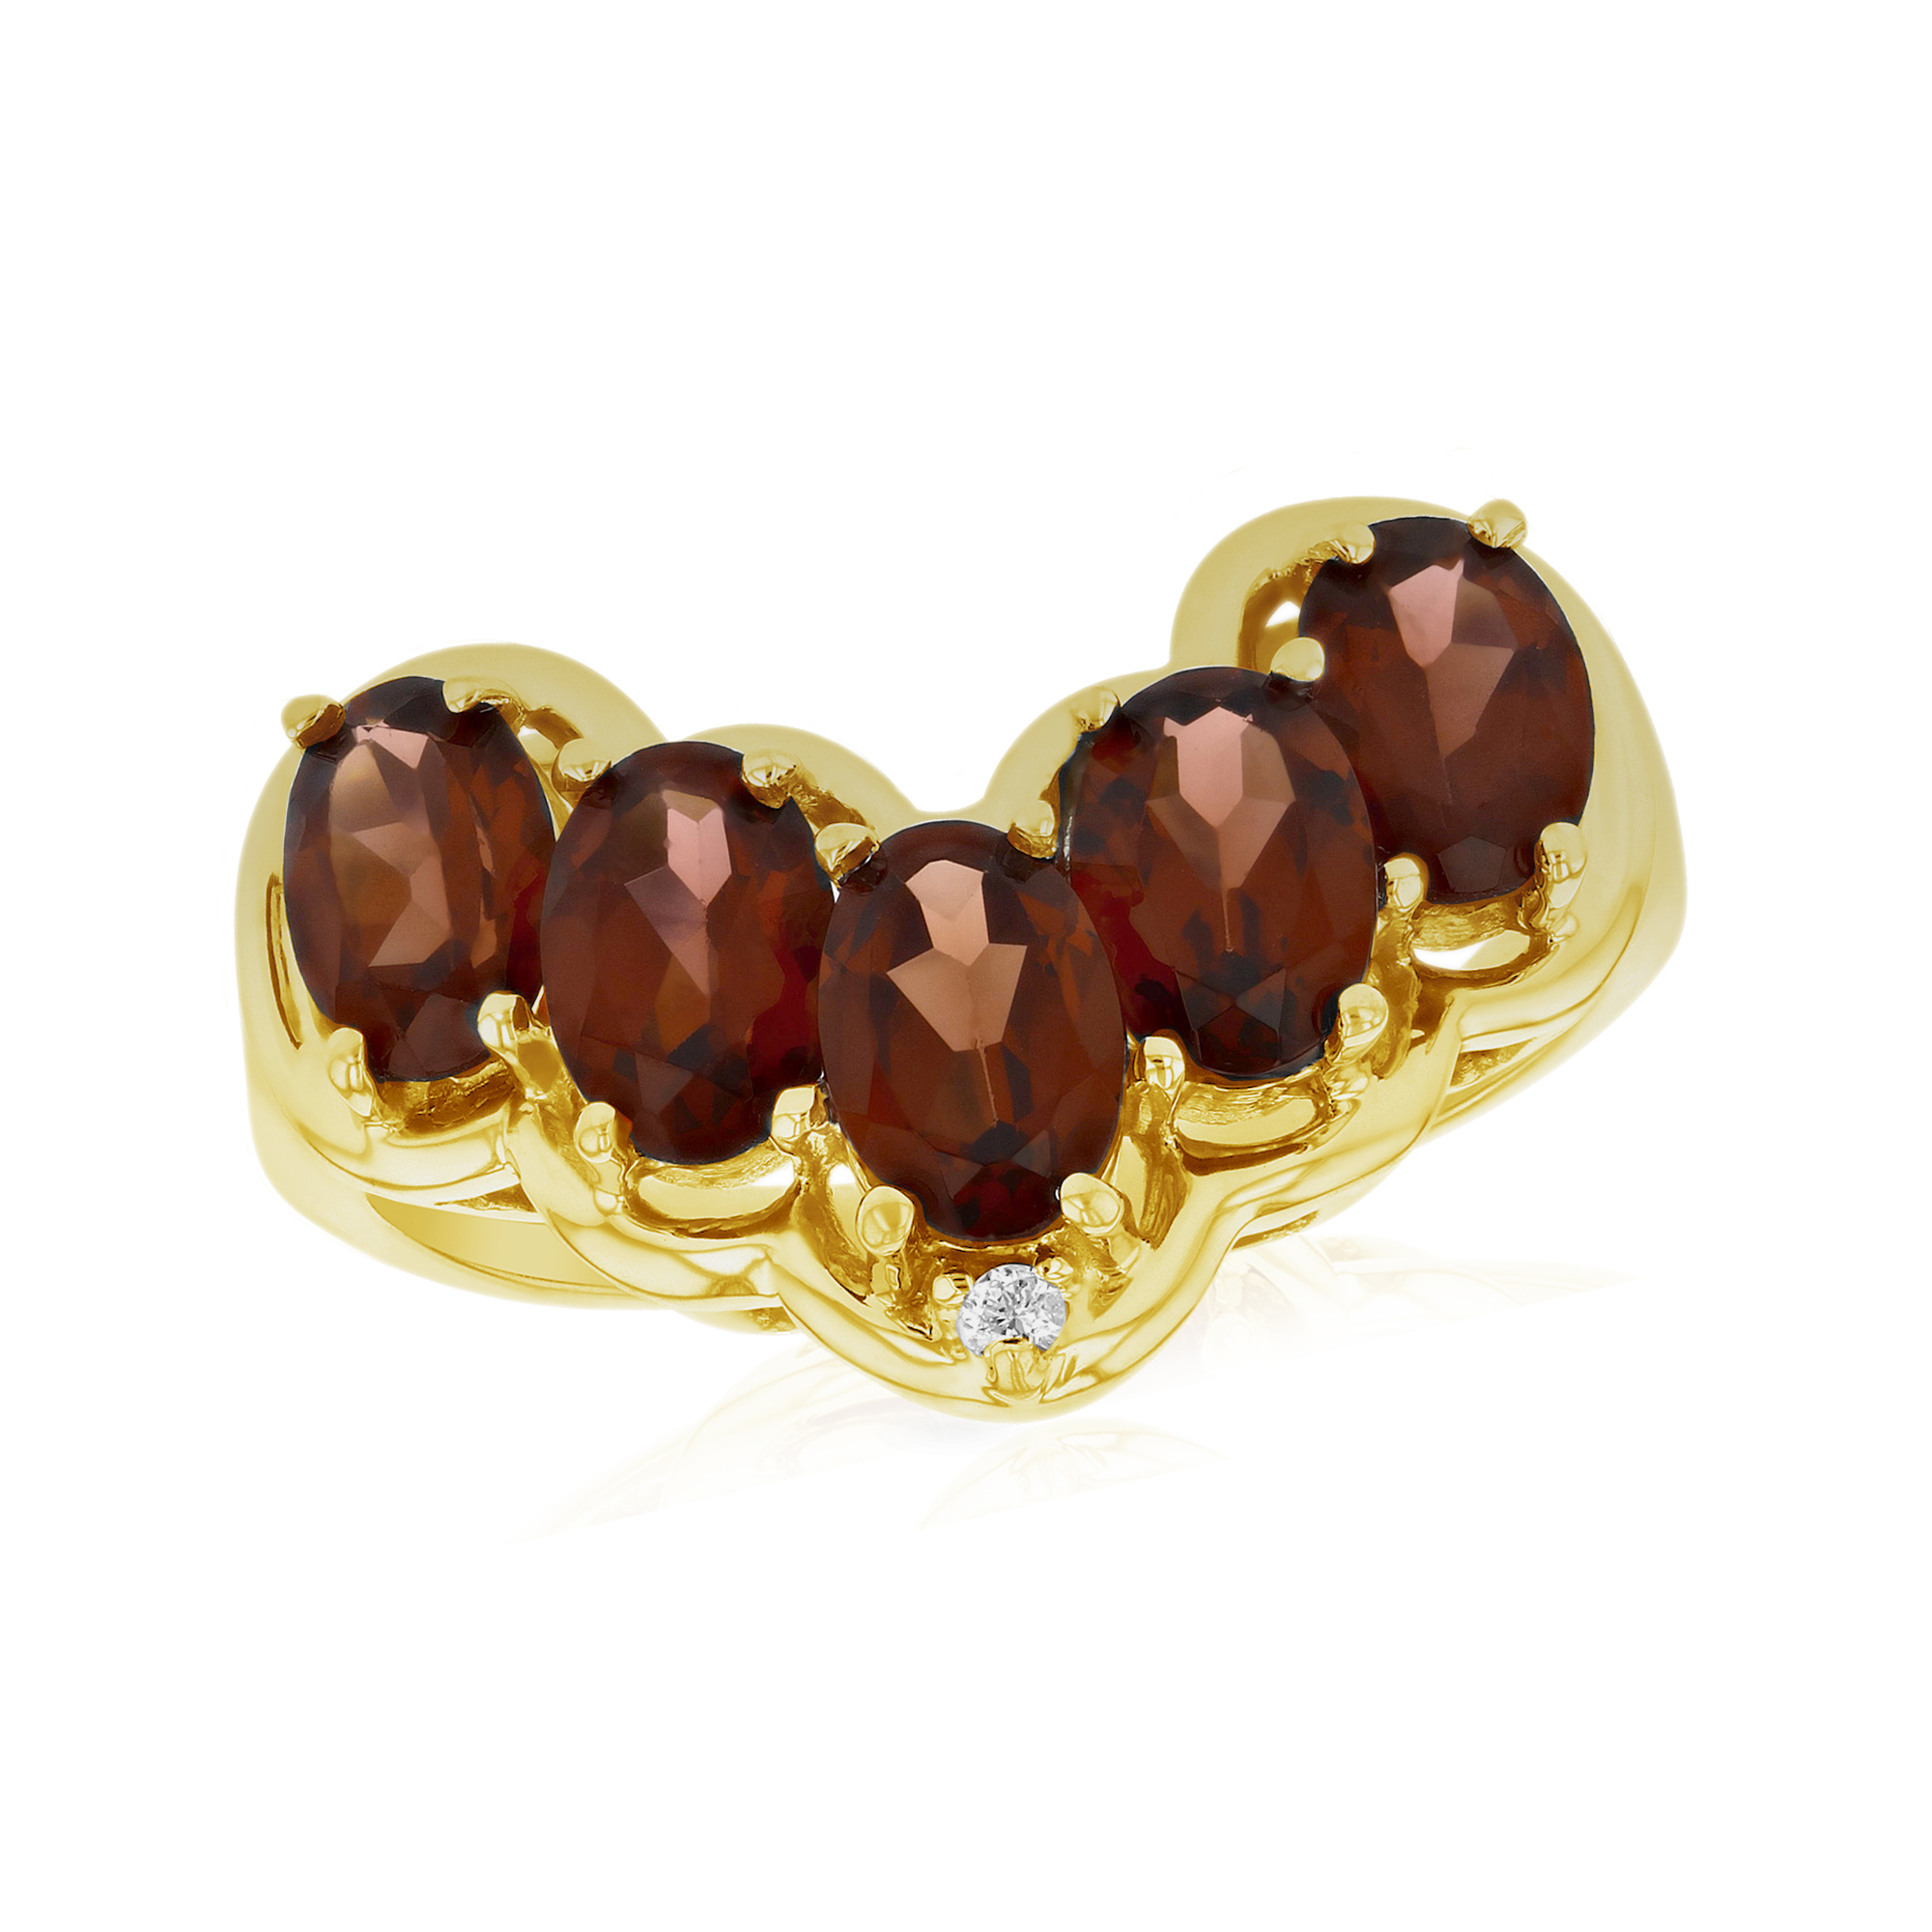 View 0.01ctw Diamond and Garnet Fashion ring in 14k Yellow Gold